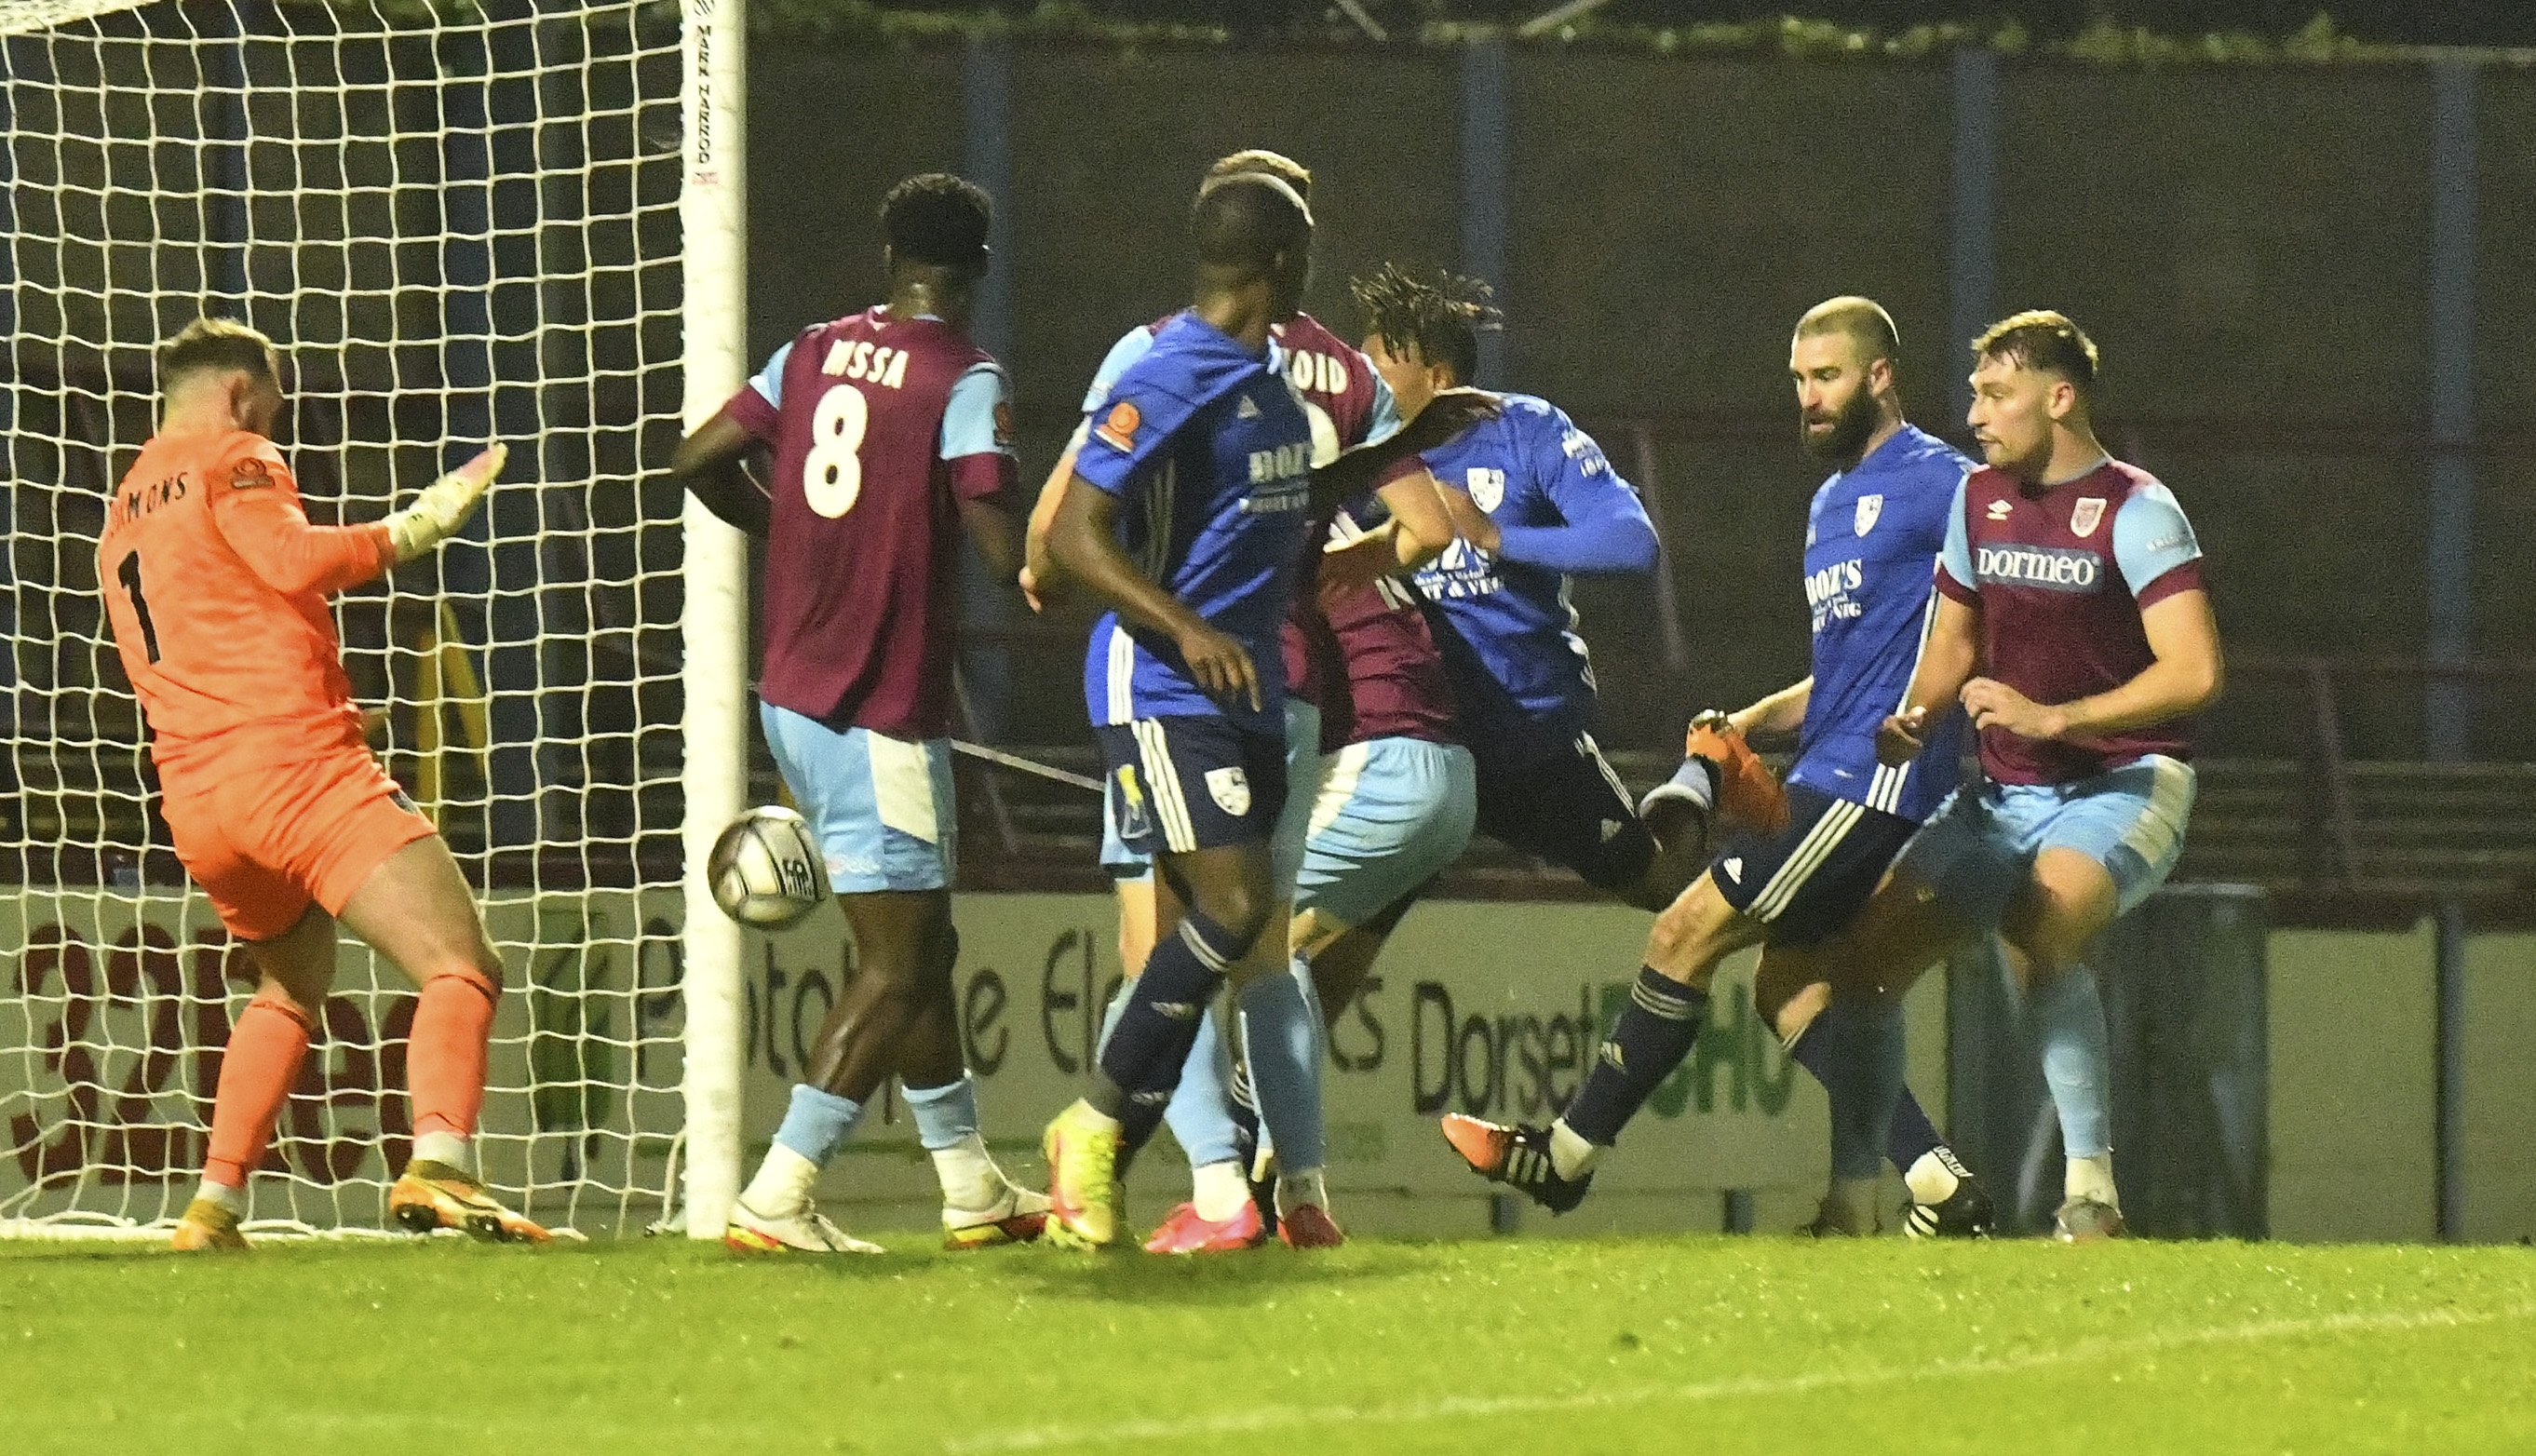 A melee in the Terras goalmouth but Campbell tucks the ball away